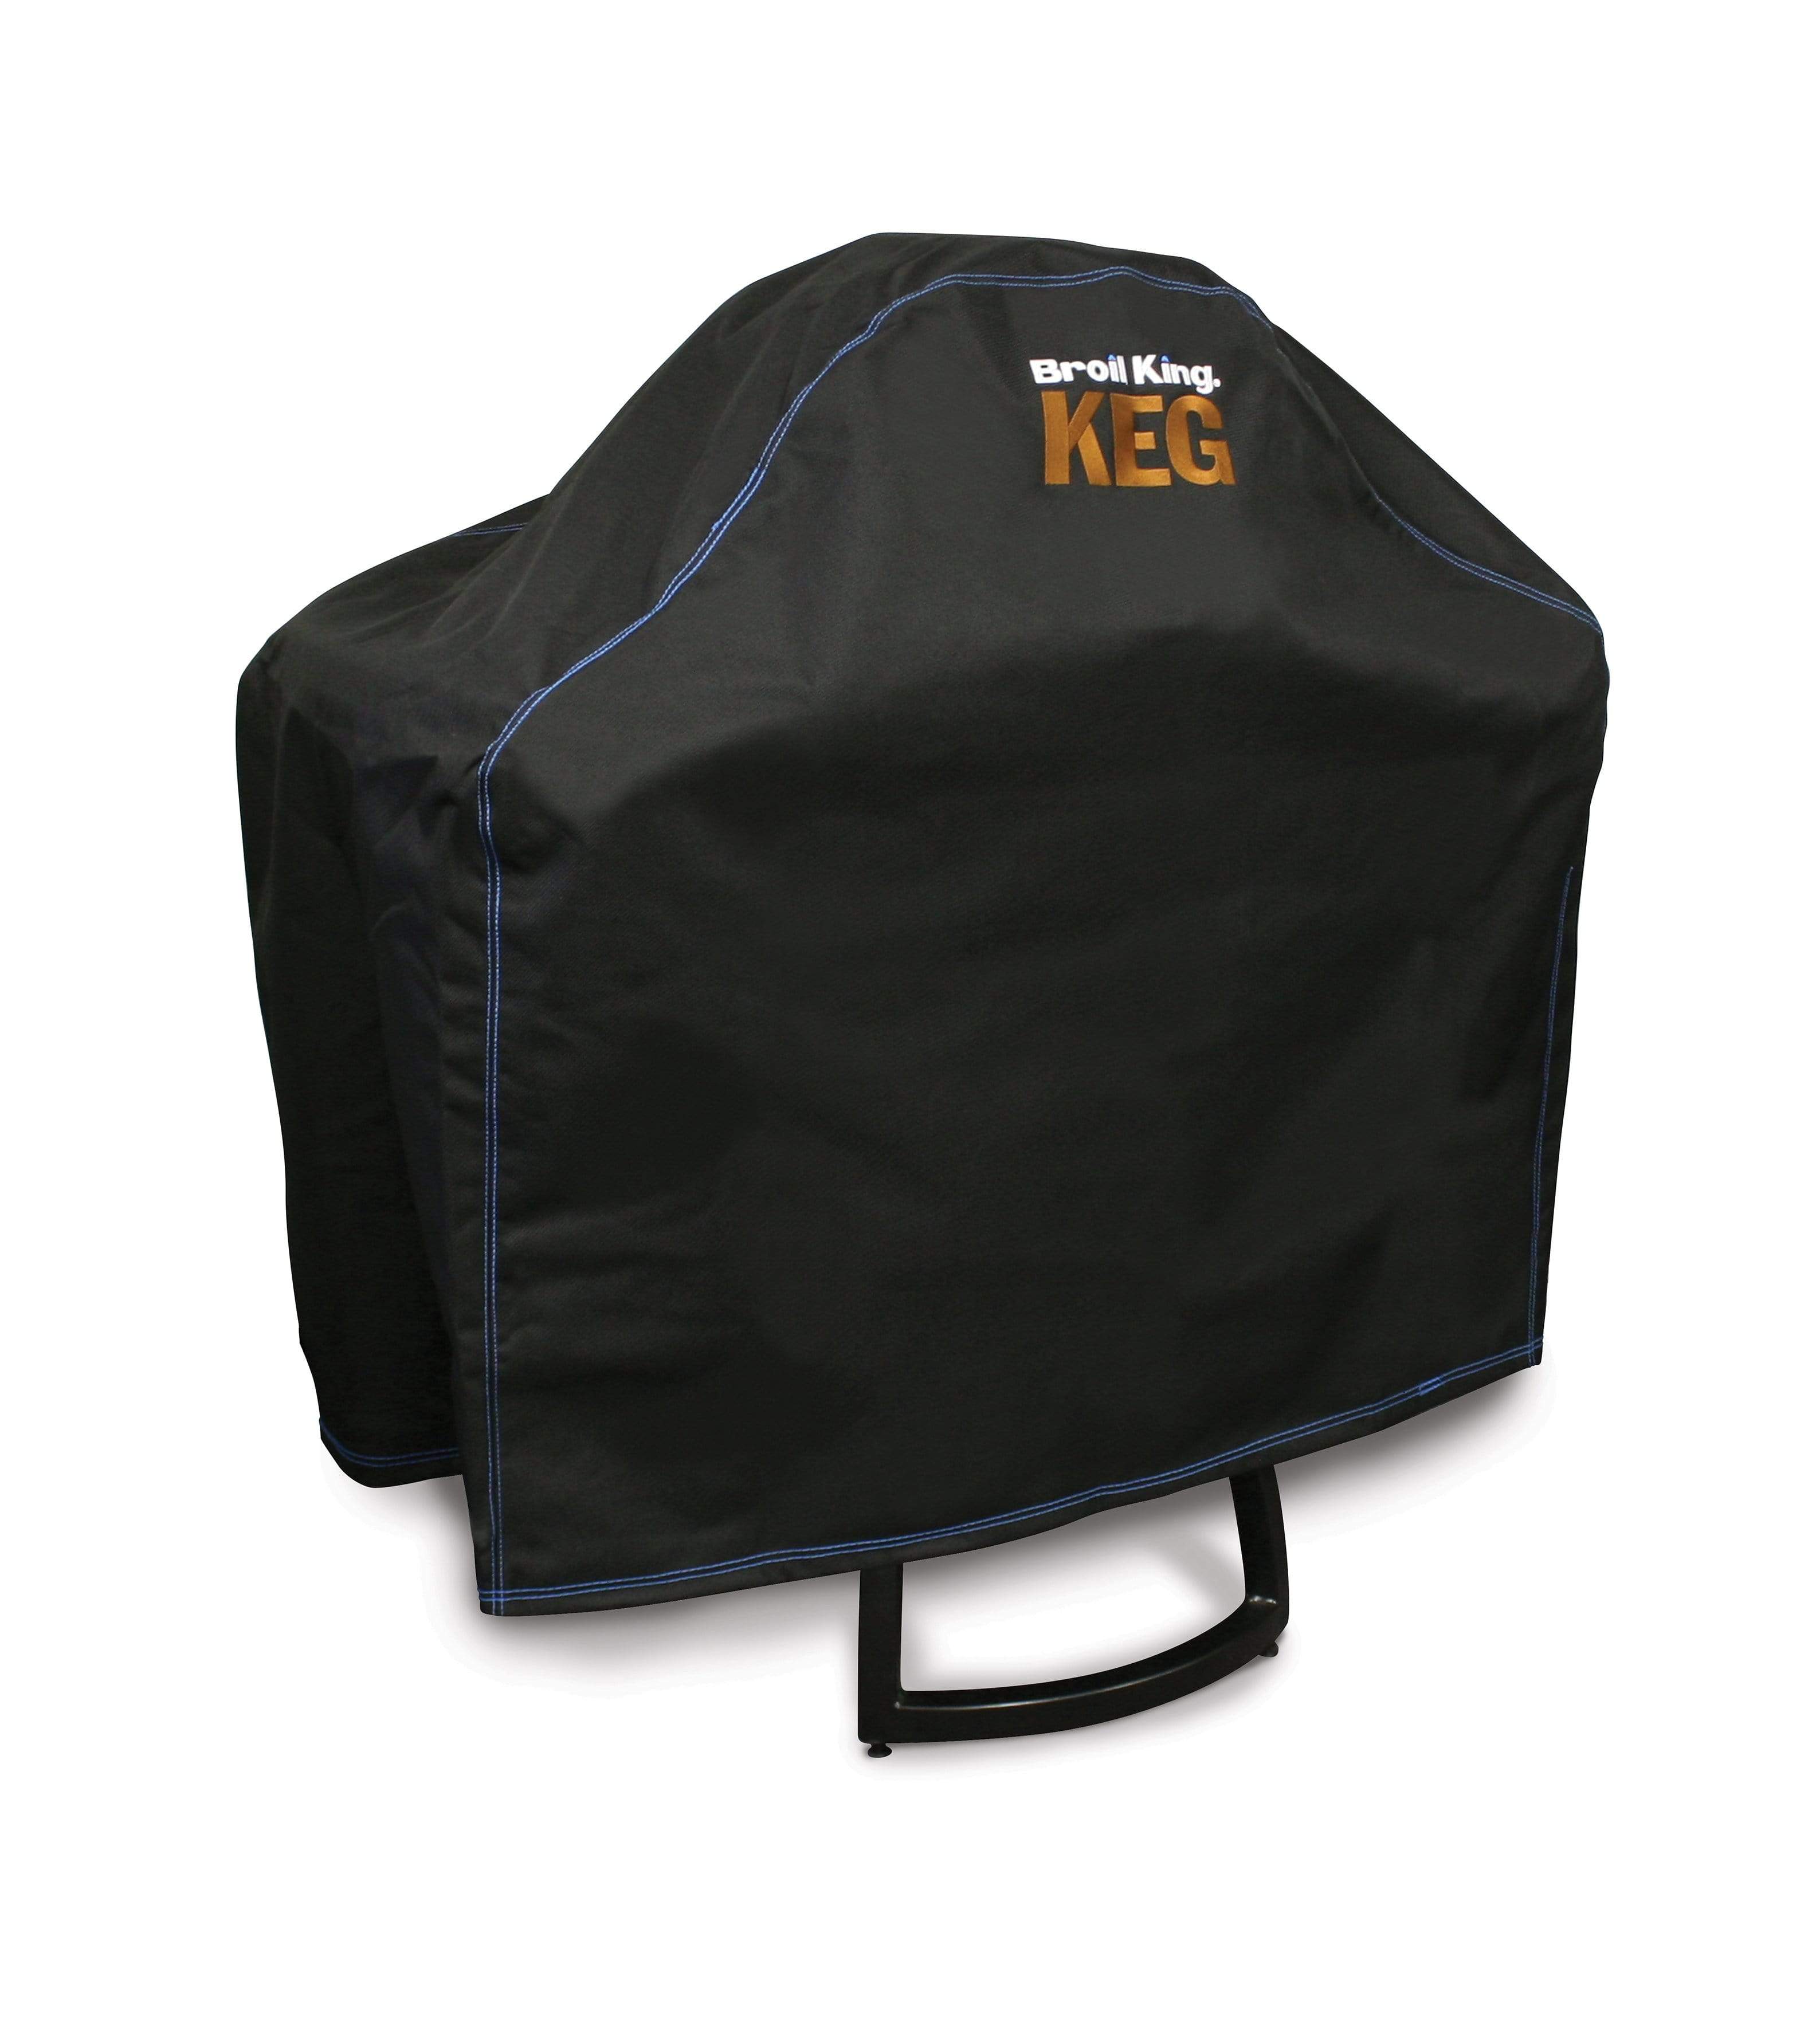 Broil King Broil King Accessories GRILL COVER - PREMIUM - KEG 4000/5000